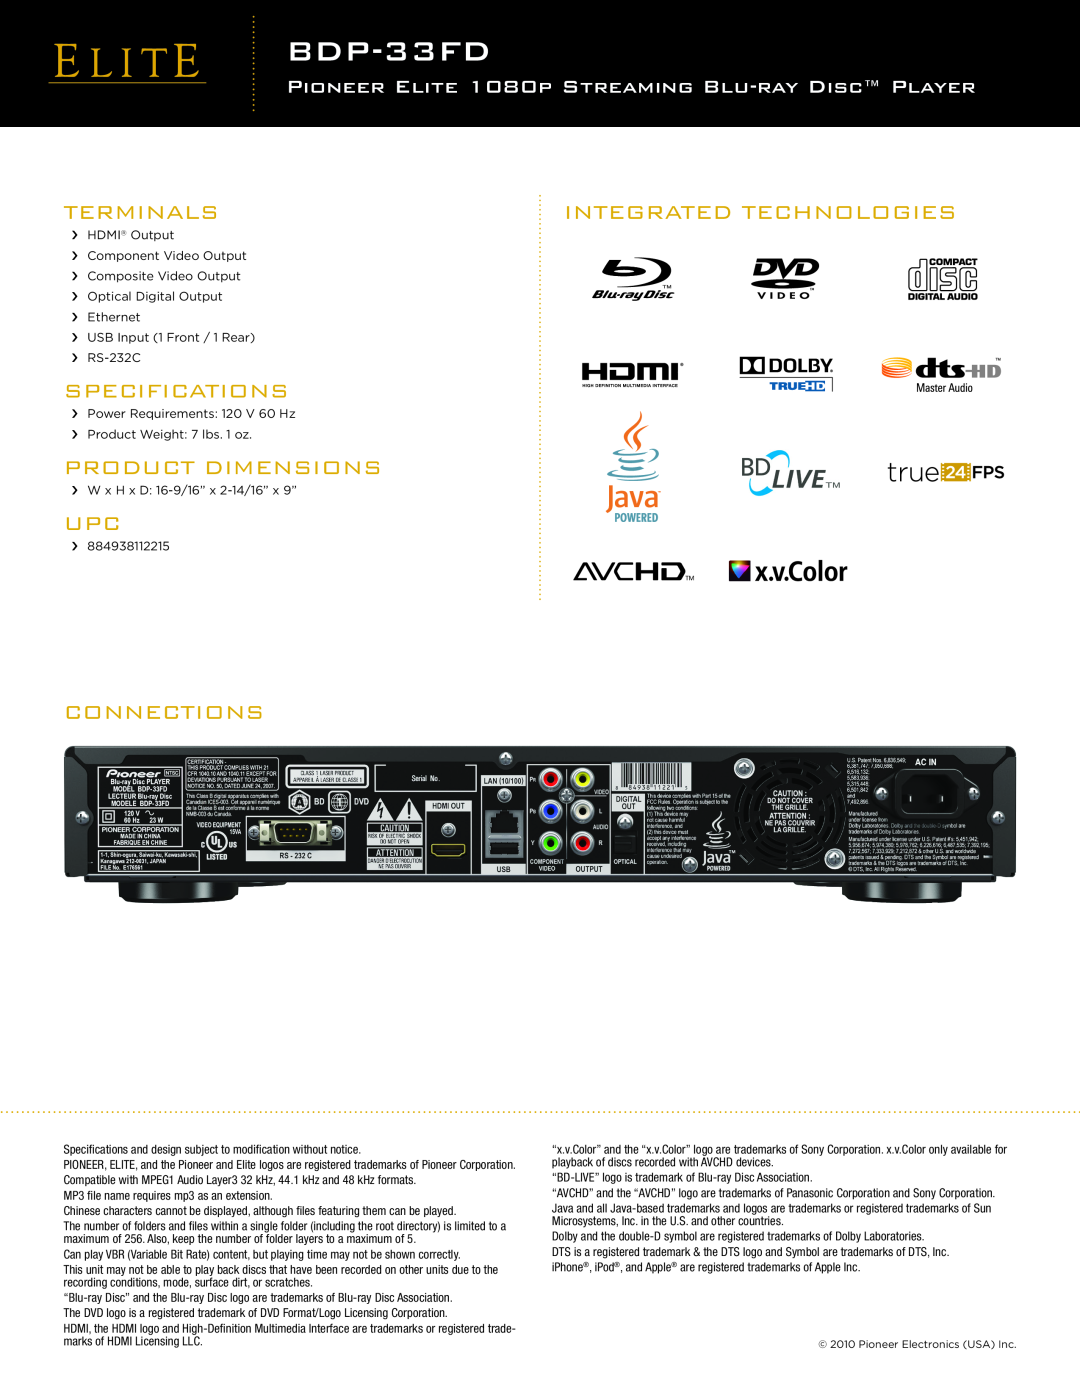 Pioneer BDP-33FD manual Terminals, Integrated Technologies, Specifications, Product Dimensions, Connections 